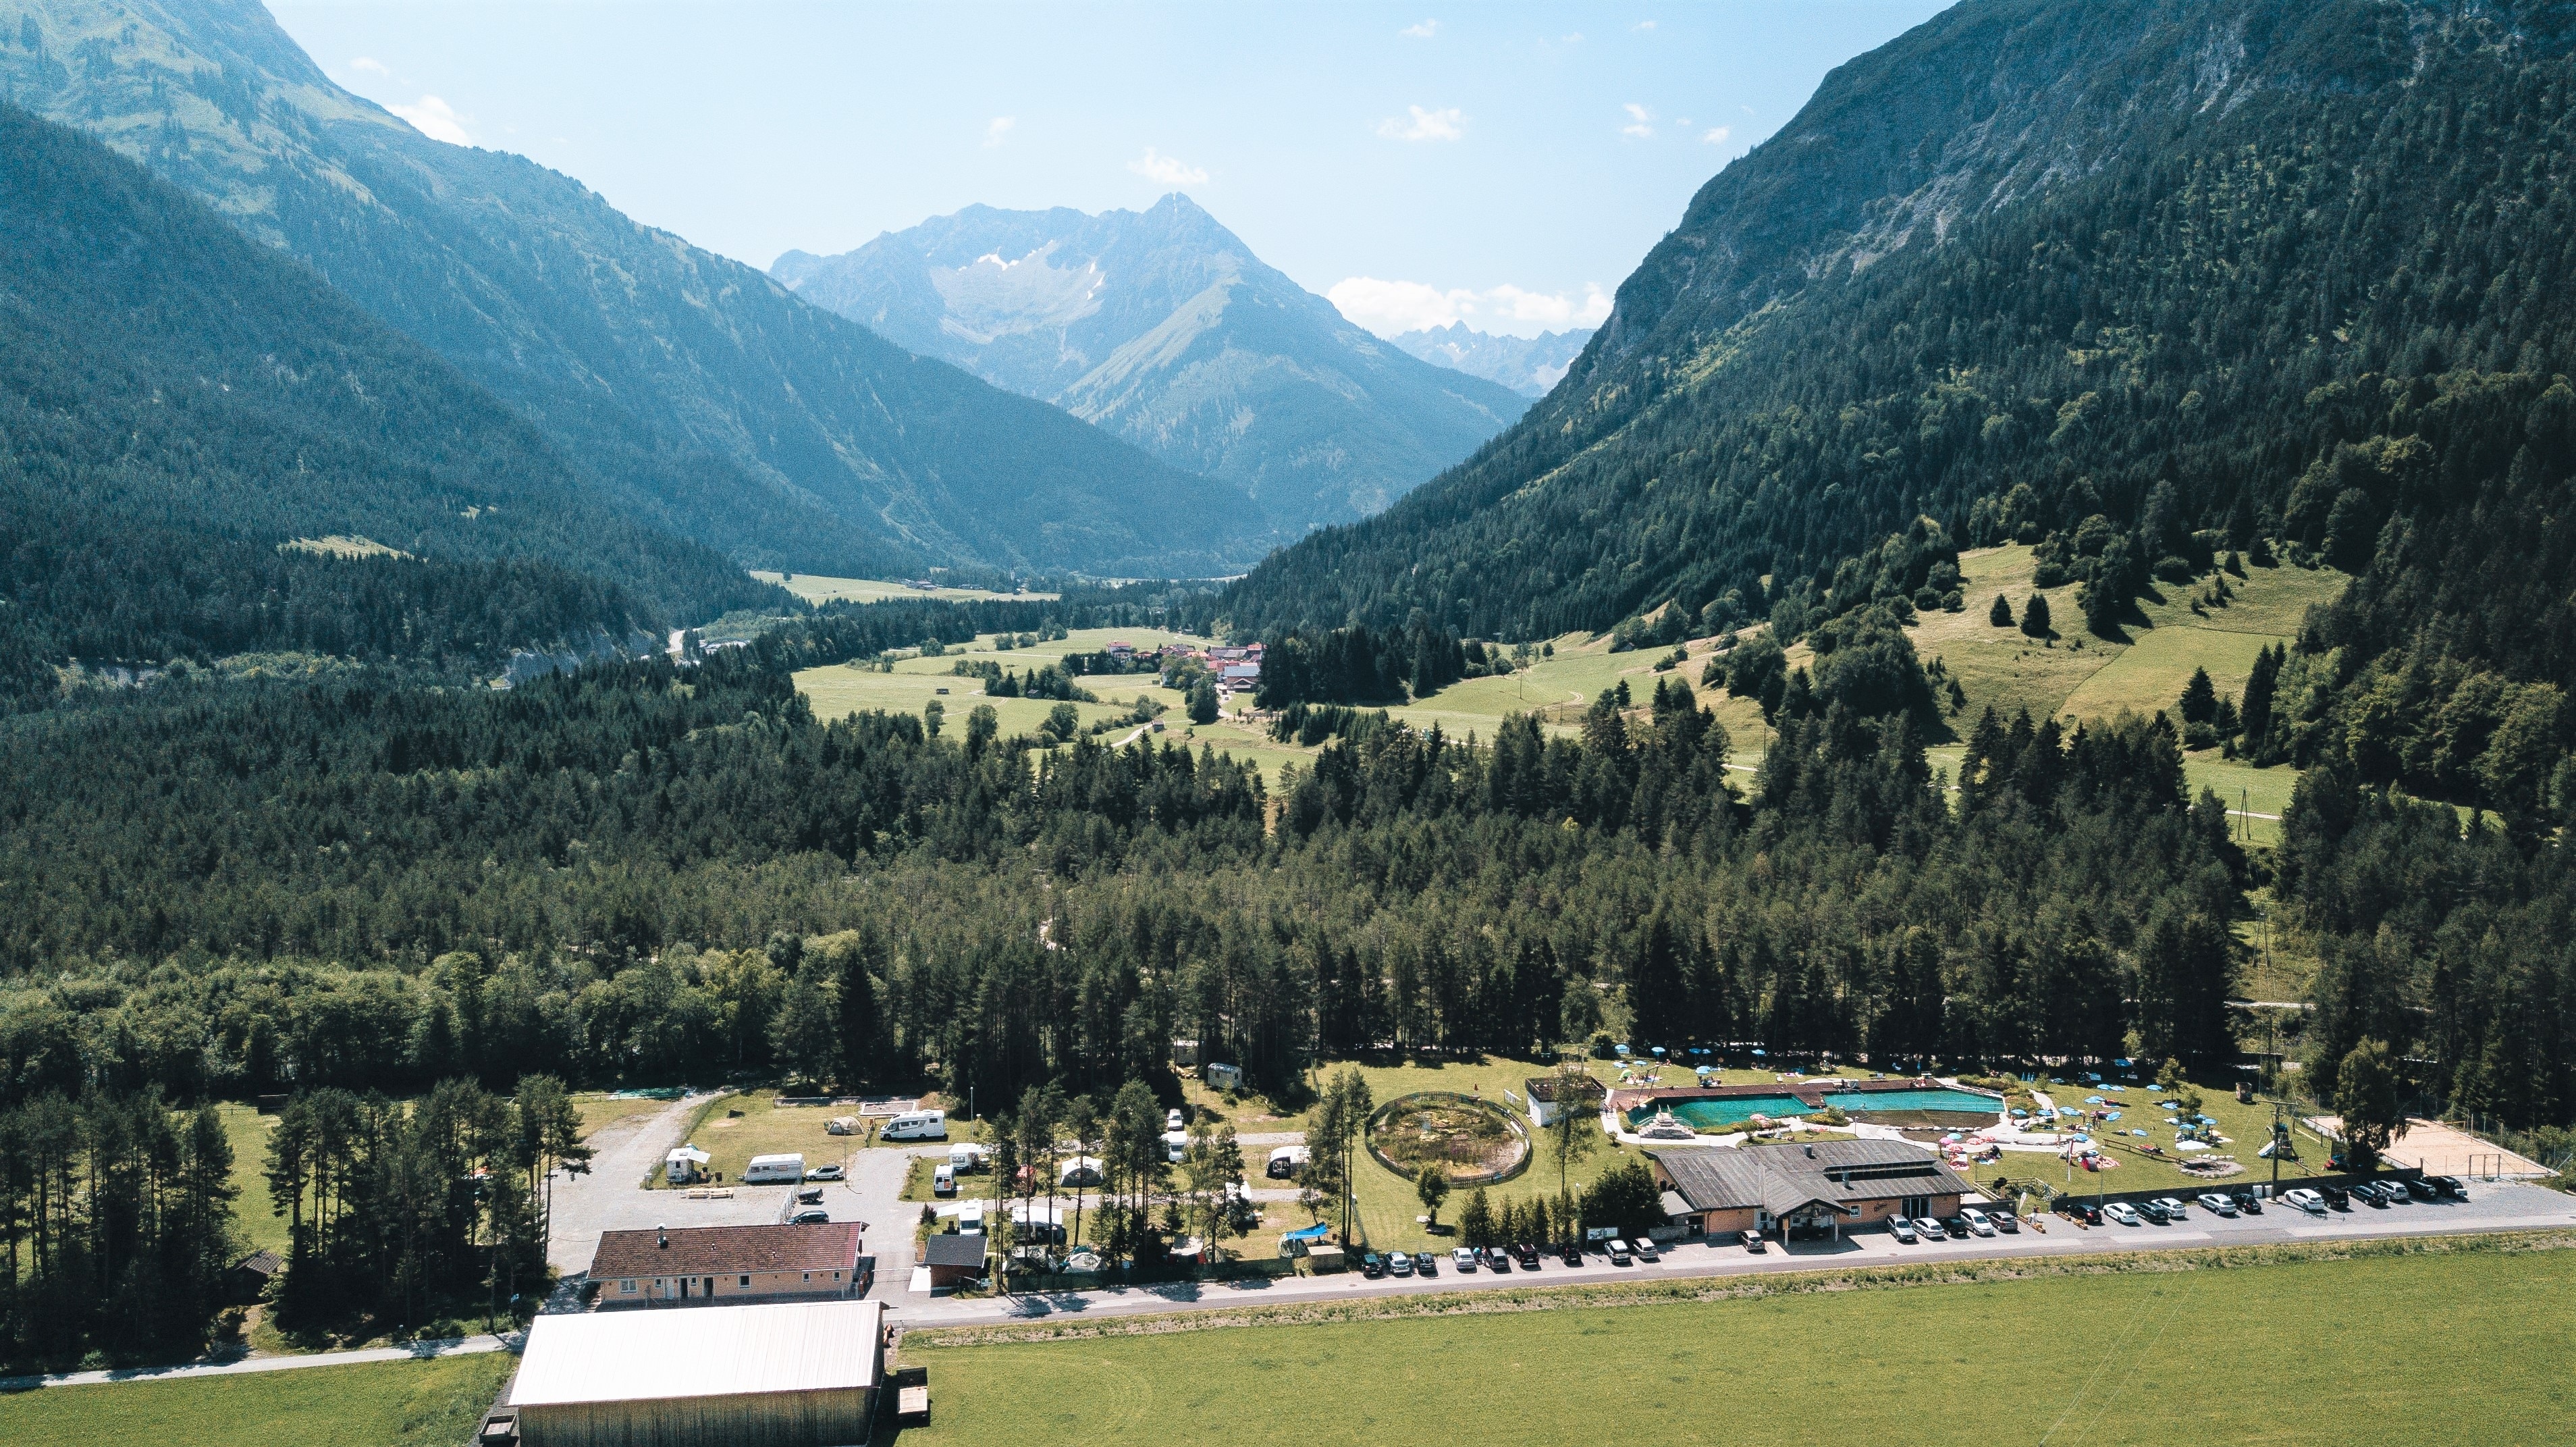 Camping Lechtal